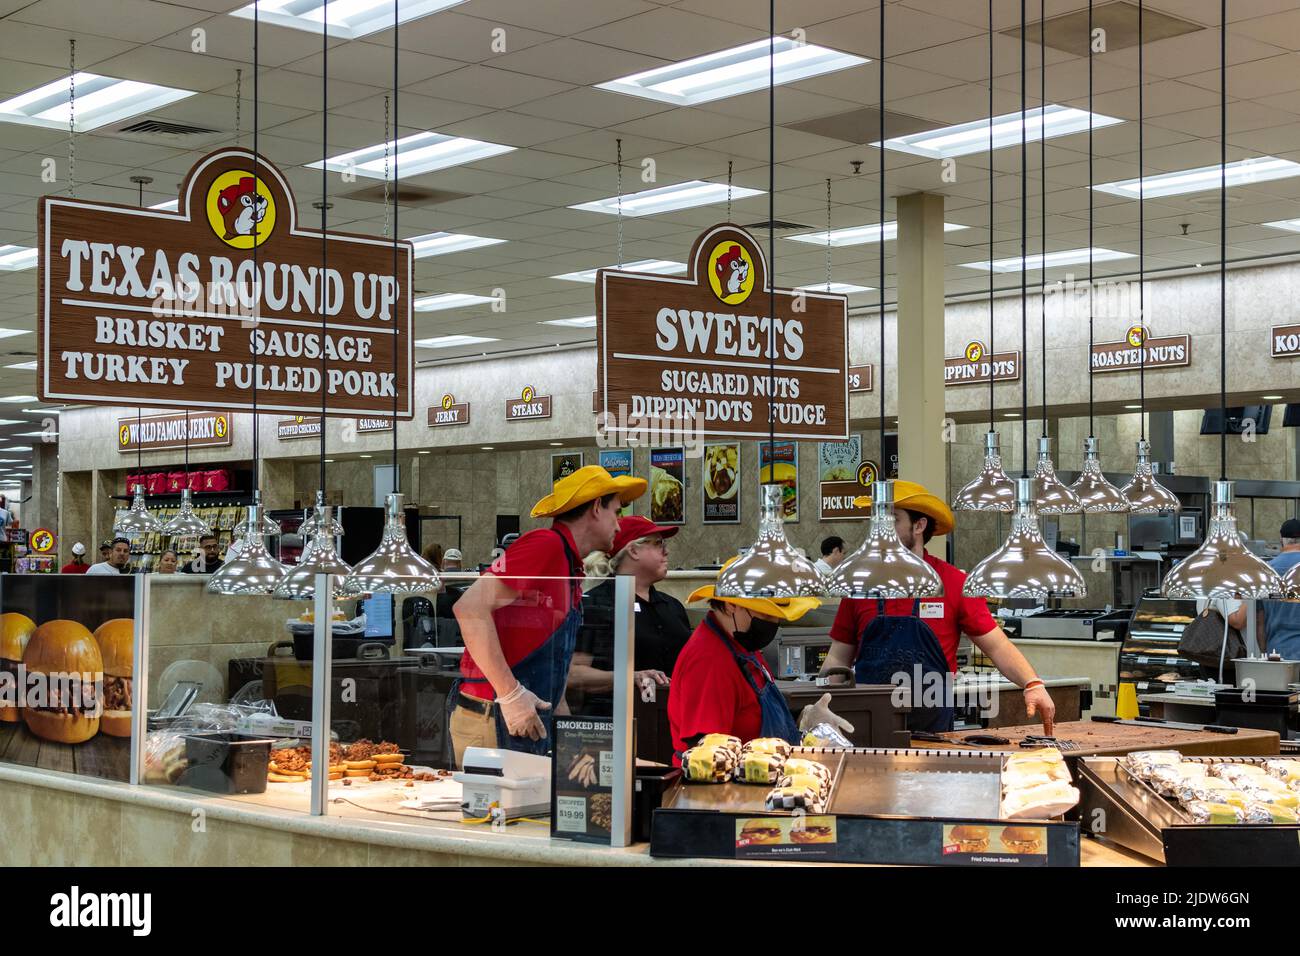 Buc-ee's chain of giant convenience stores and Travel Centers based in Texas. Stock Photo